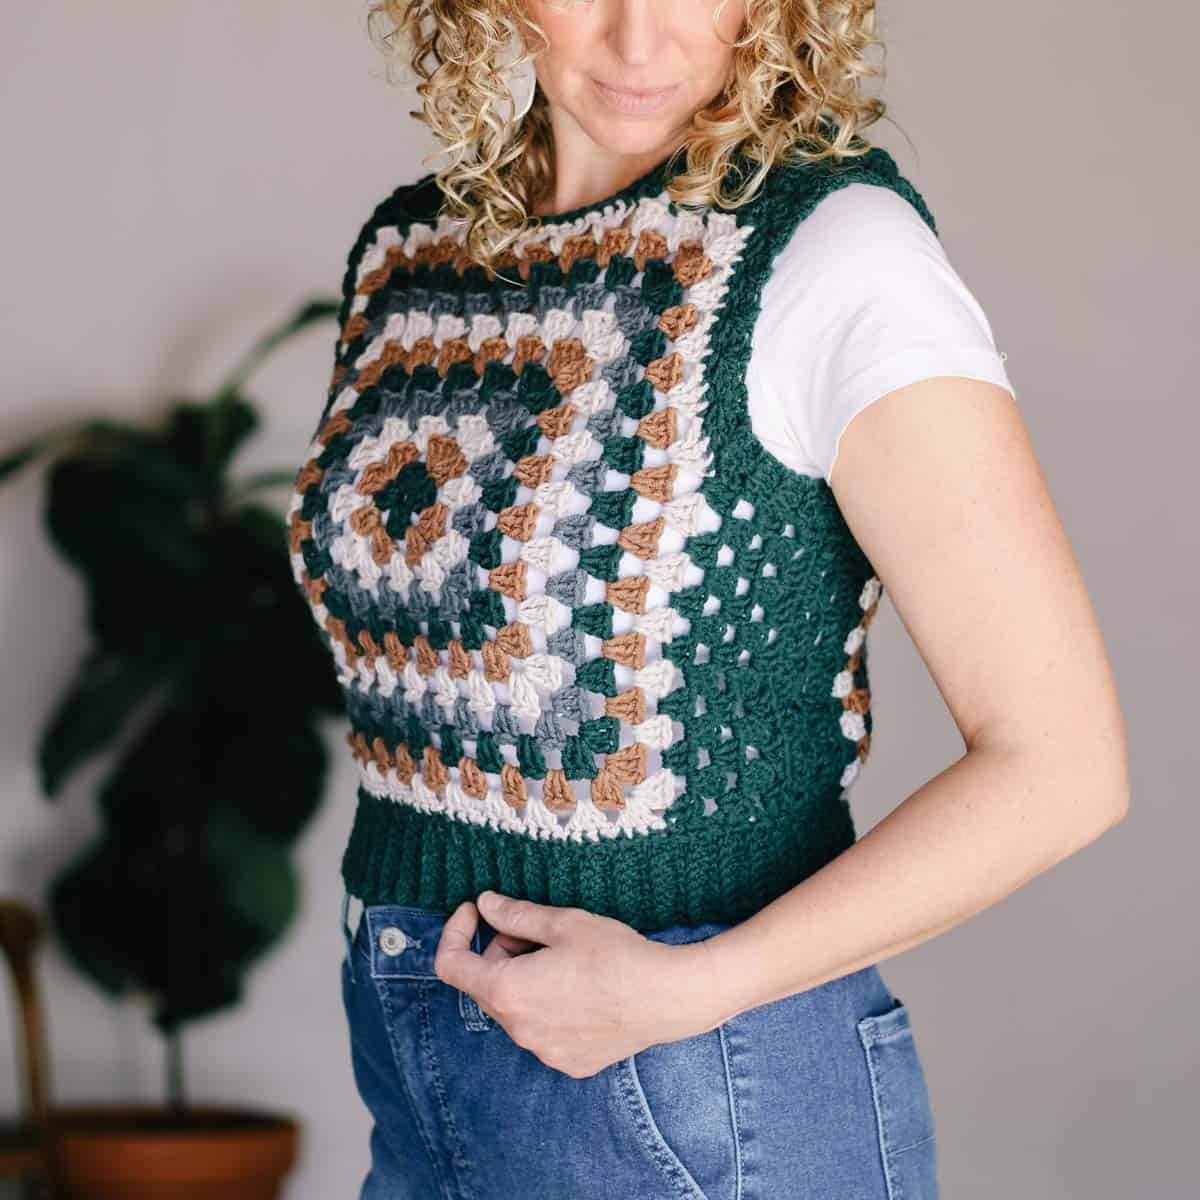 This basic tank top taught me a lot! : r/knitting